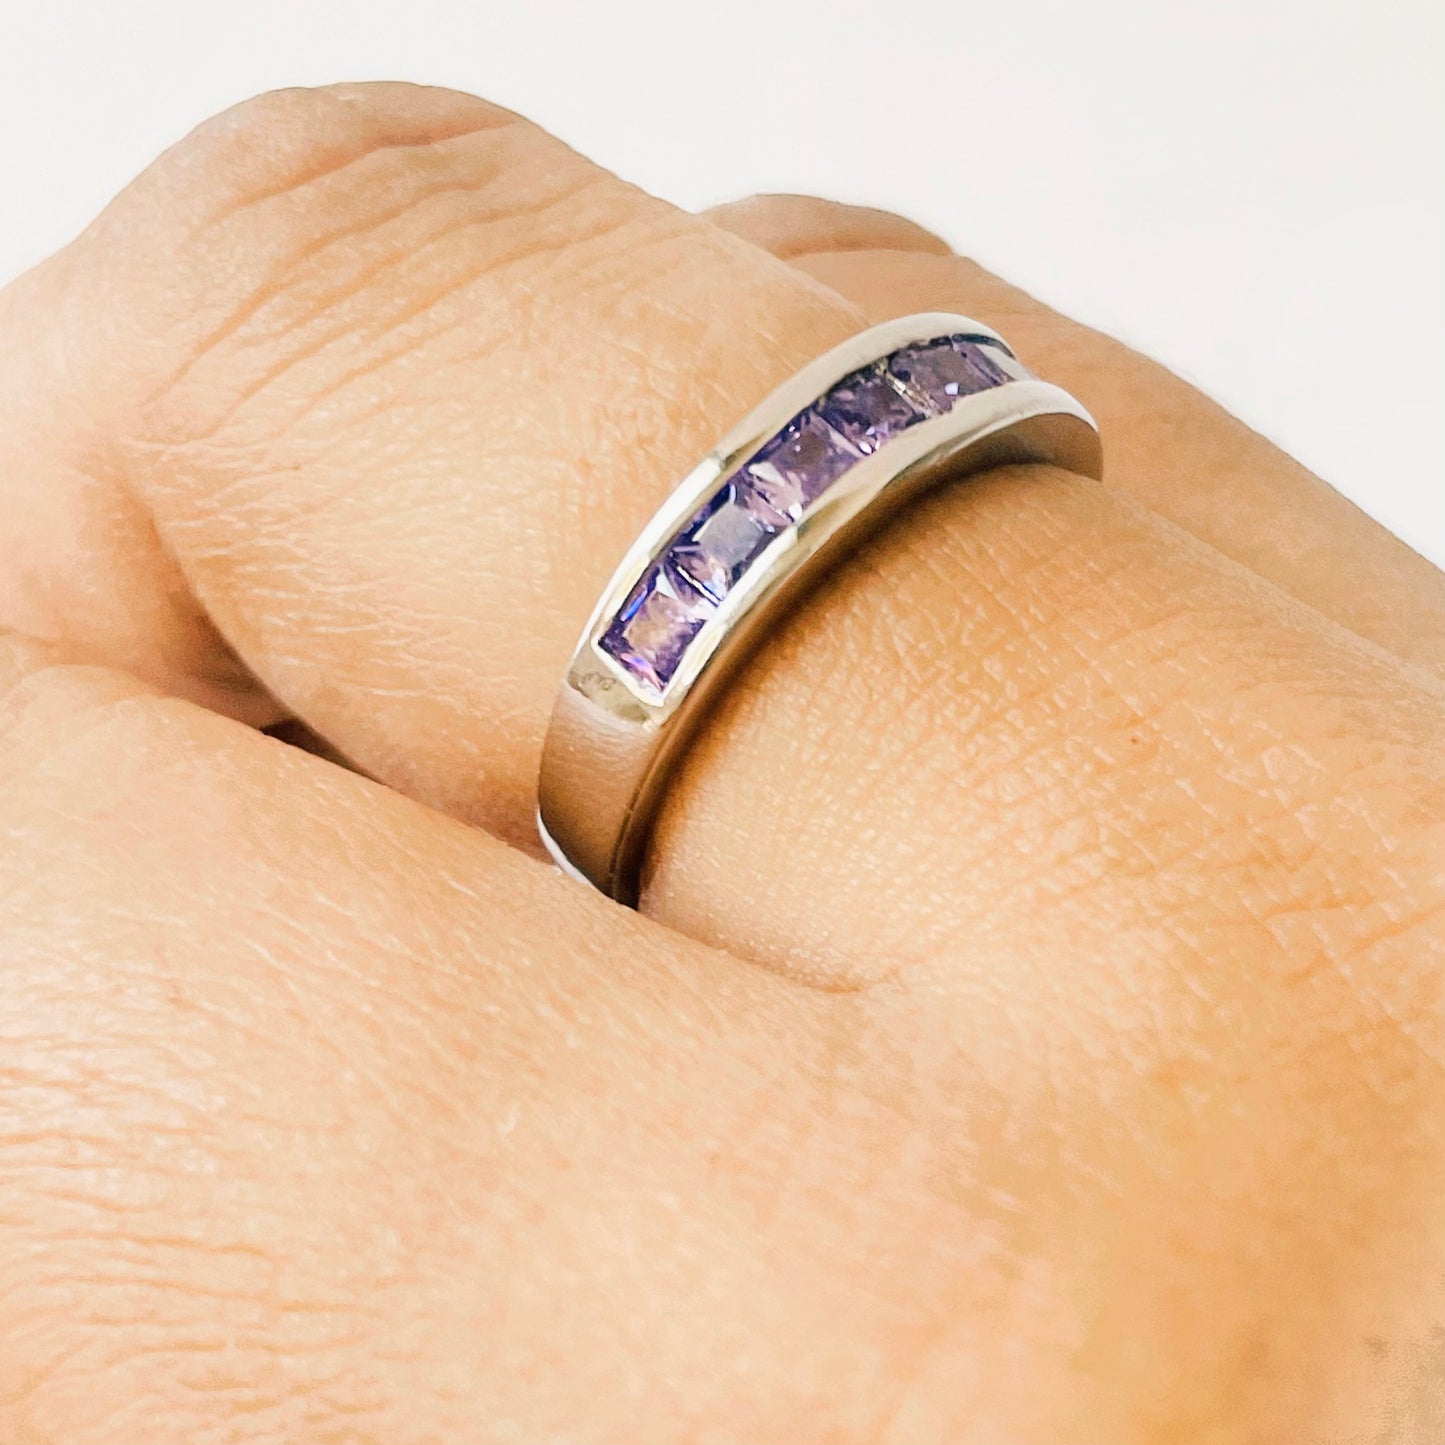 Luxurious Sterling Silver Purple Ring